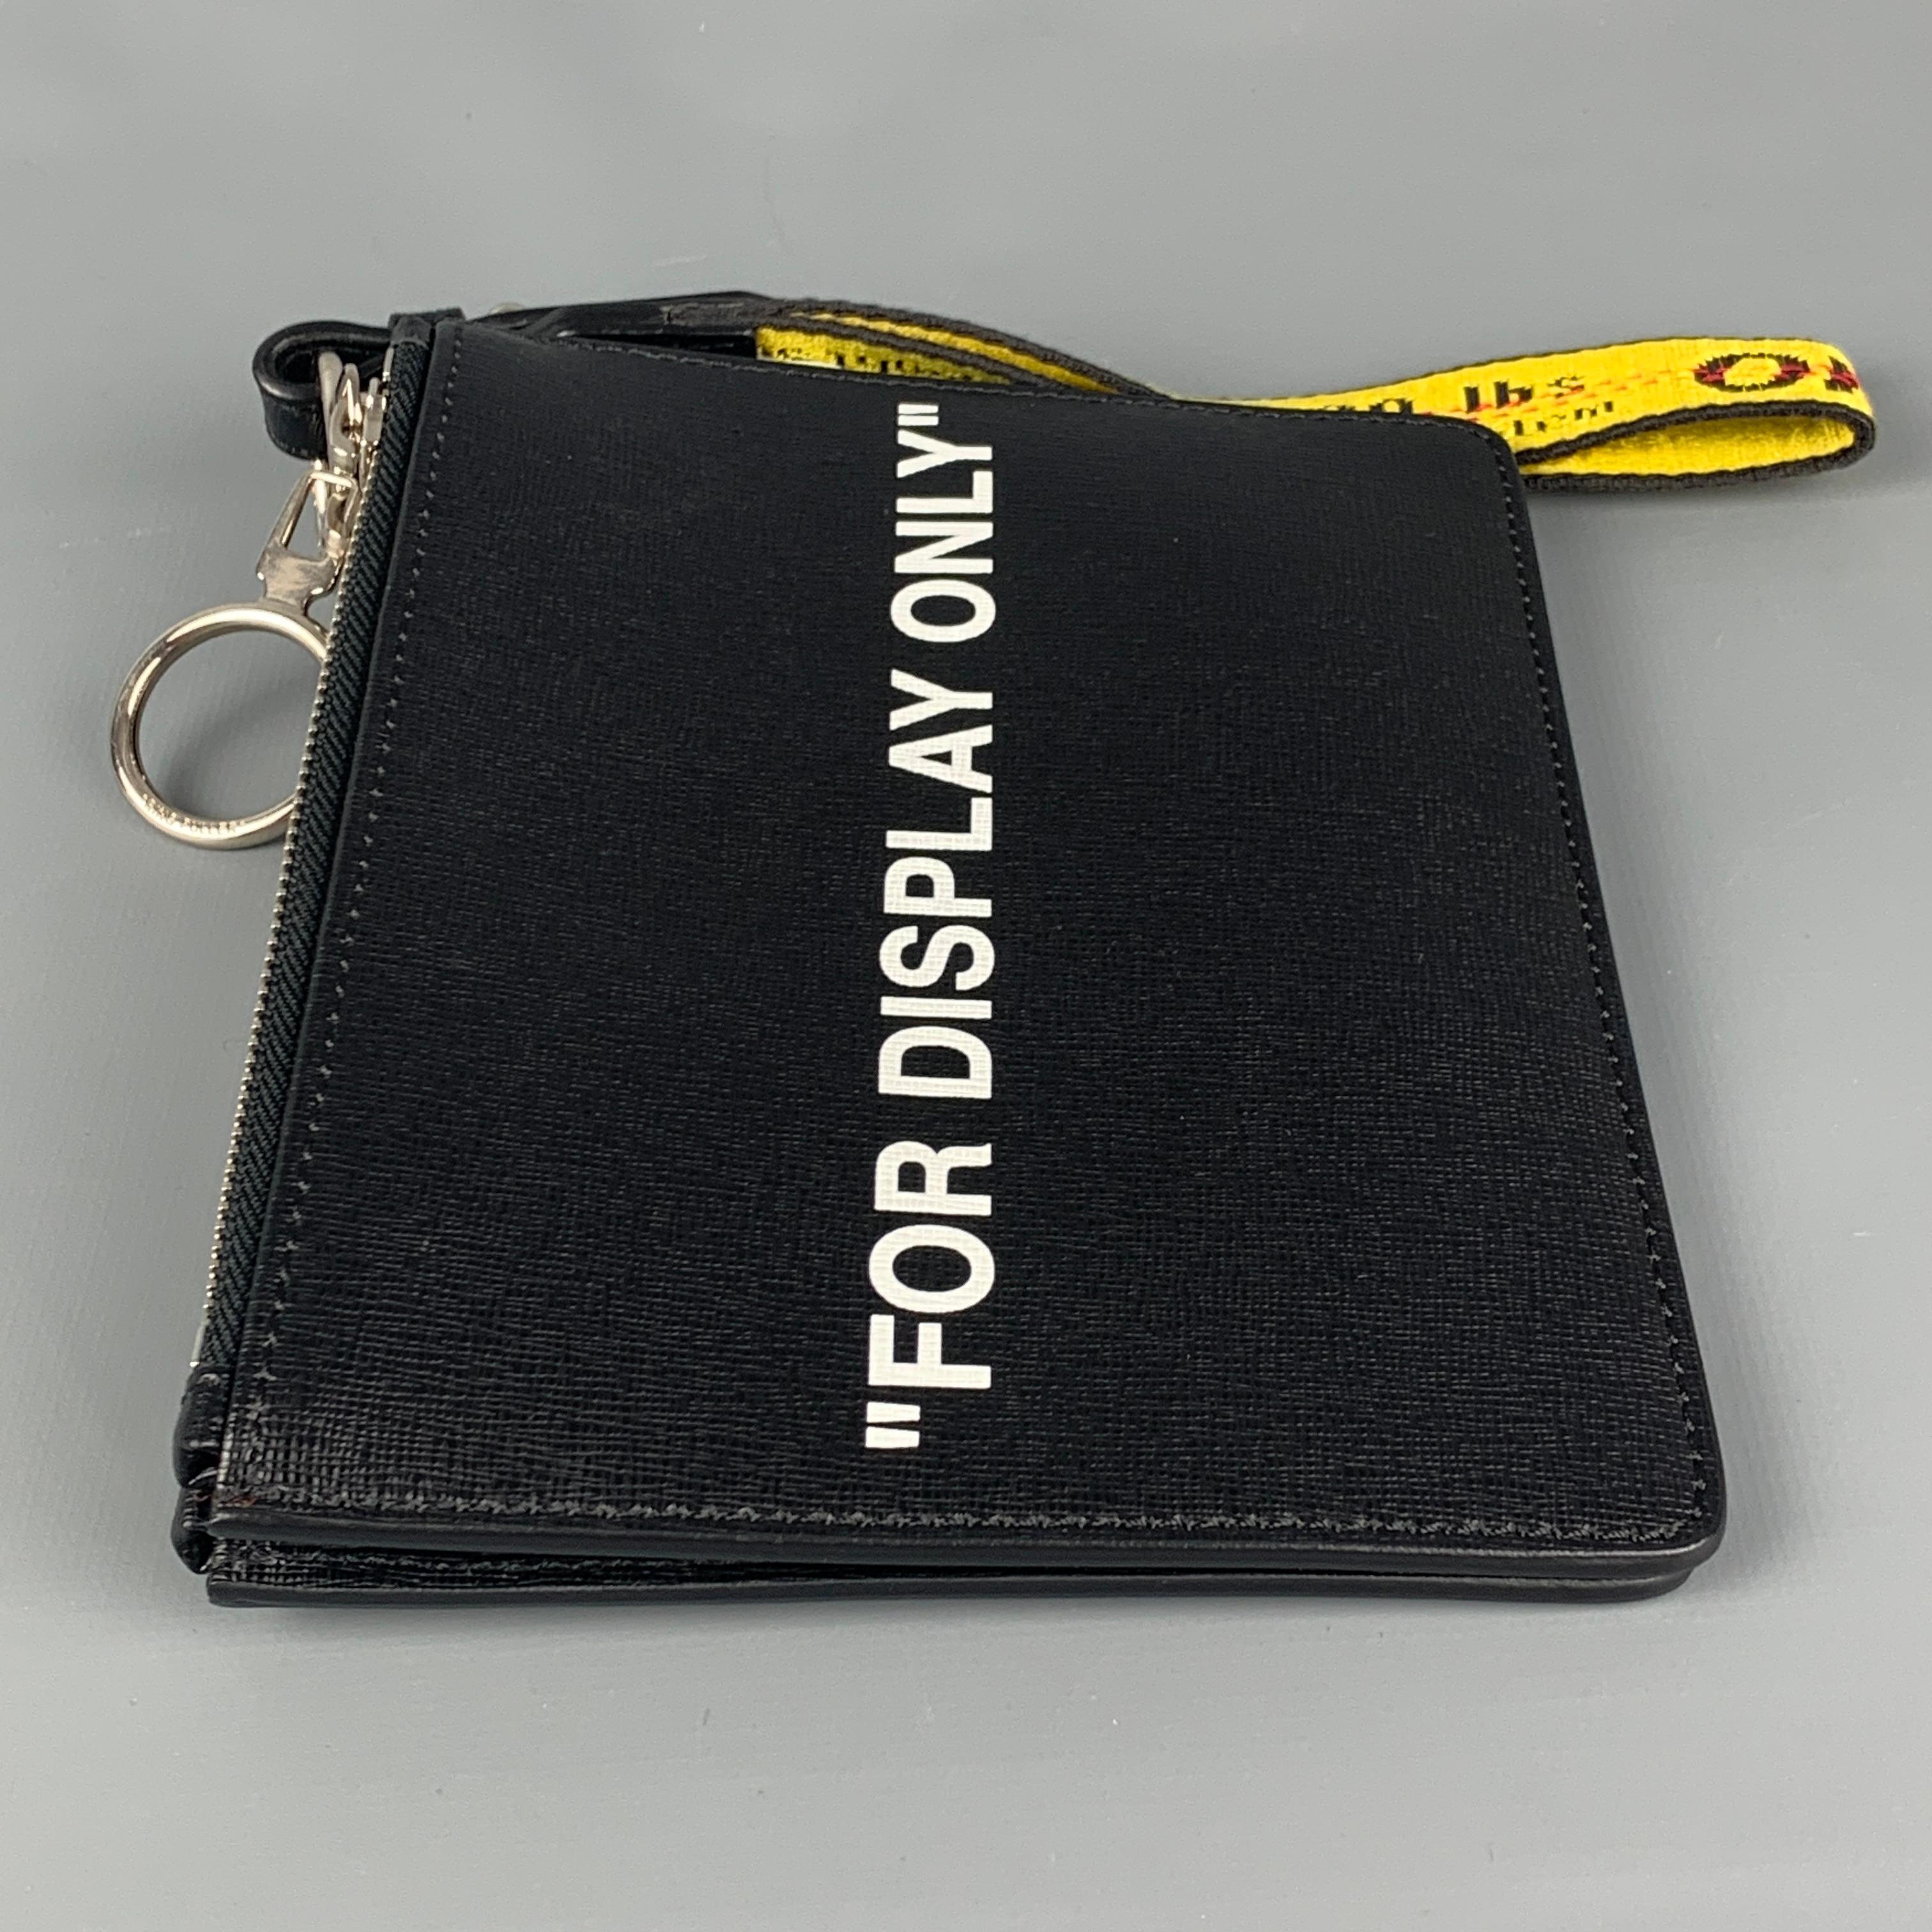 OFF-WHITE by Virgin Abloh double pouch comes in a black leather featuring a detachable design, 